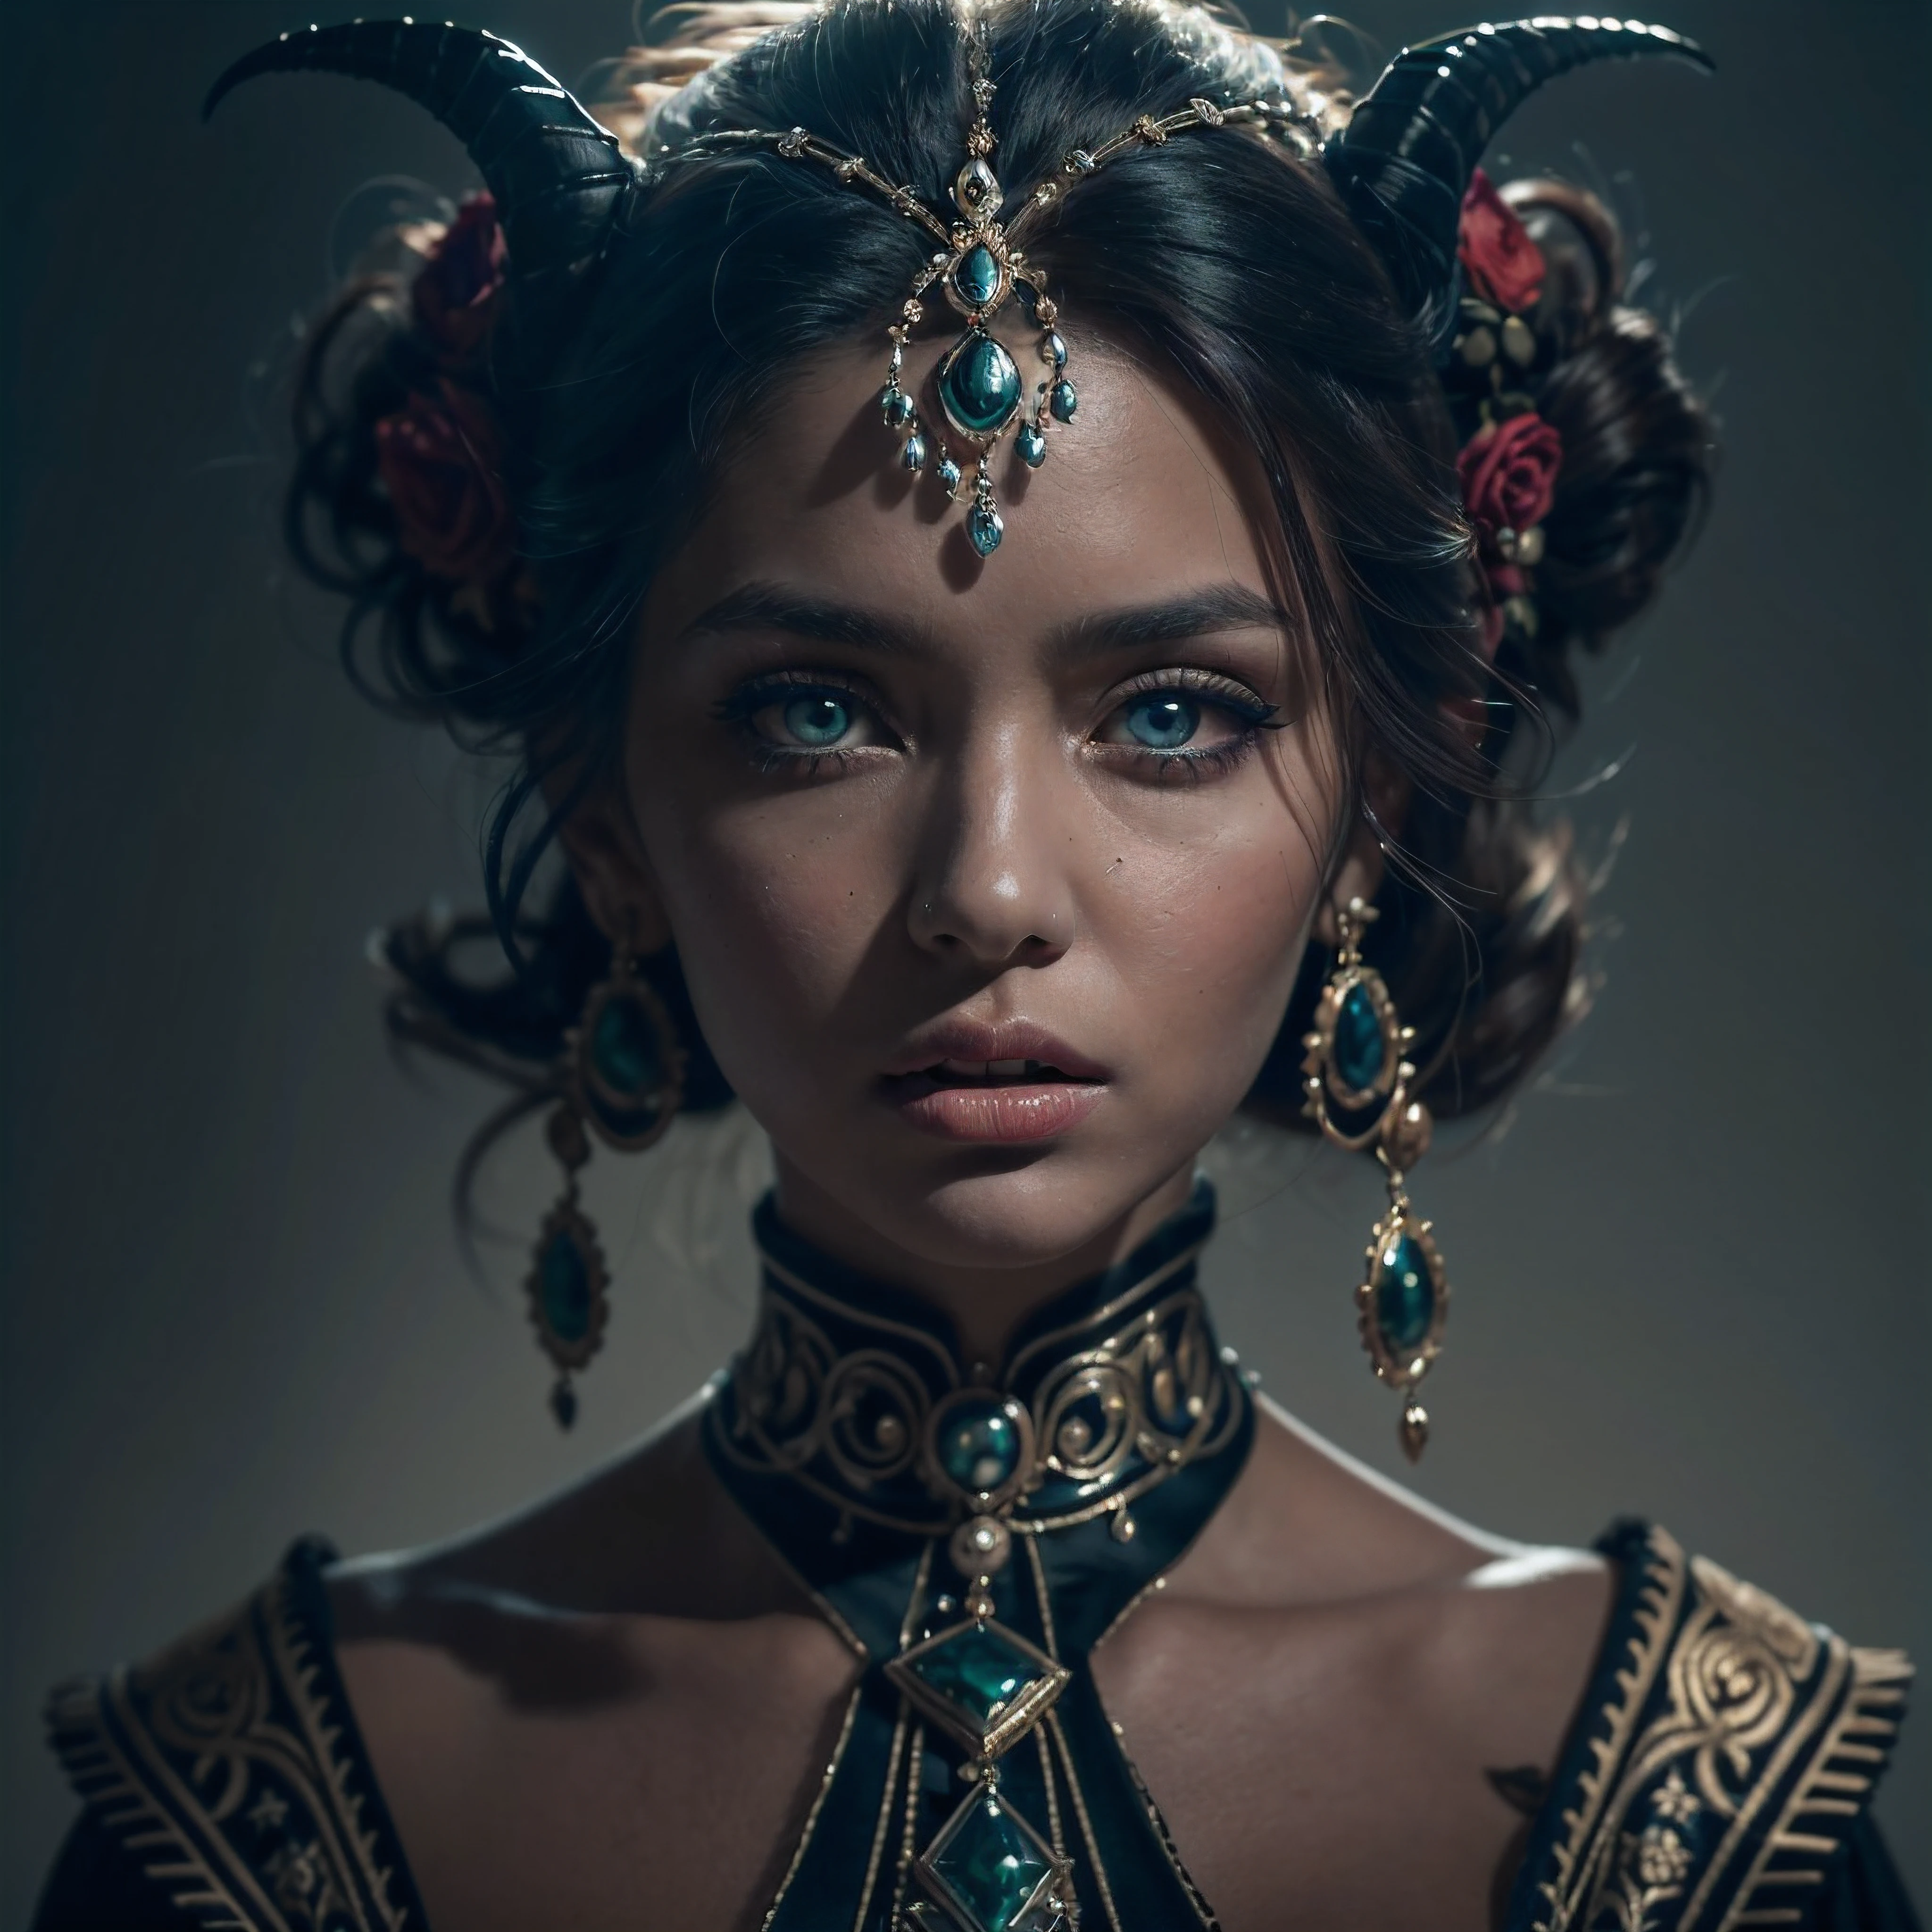 (complex composition:1.3), (detailed and expressive eyes:1.6), (futuristic style), (An exquisite portrait of a demonic woman:1.3), (she wears elegant regal clothing:1.2), (closed mouth:1.2), (authentic expression in her eyes: 1.2), wearing dark smoke eye makeup, the photograph captured in stunning 8k resolution and raw format to preserve the highest quality of details. (bare shoulders), (her eyes are portrayed with meticulous attention to detail: 1.3), The photograph is taken with a lens that emphasizes the depth in her eyes, and the backdrop is a dark studio setting that enhances the colours of the scene. The lighting and shadows are expertly crafted to bring out the richness of her skin tone and the intense atmosphere. Her creative hair adds a touch of contrast against her skin, The overall composition captures her essence with authenticity and grace, creating a portrait that celebrates her heritage and beauty. Photography utilizing the best techniques for shadow and lighting, to create a mesmerizing portrayal that transcends the visual, slightly tilted head,